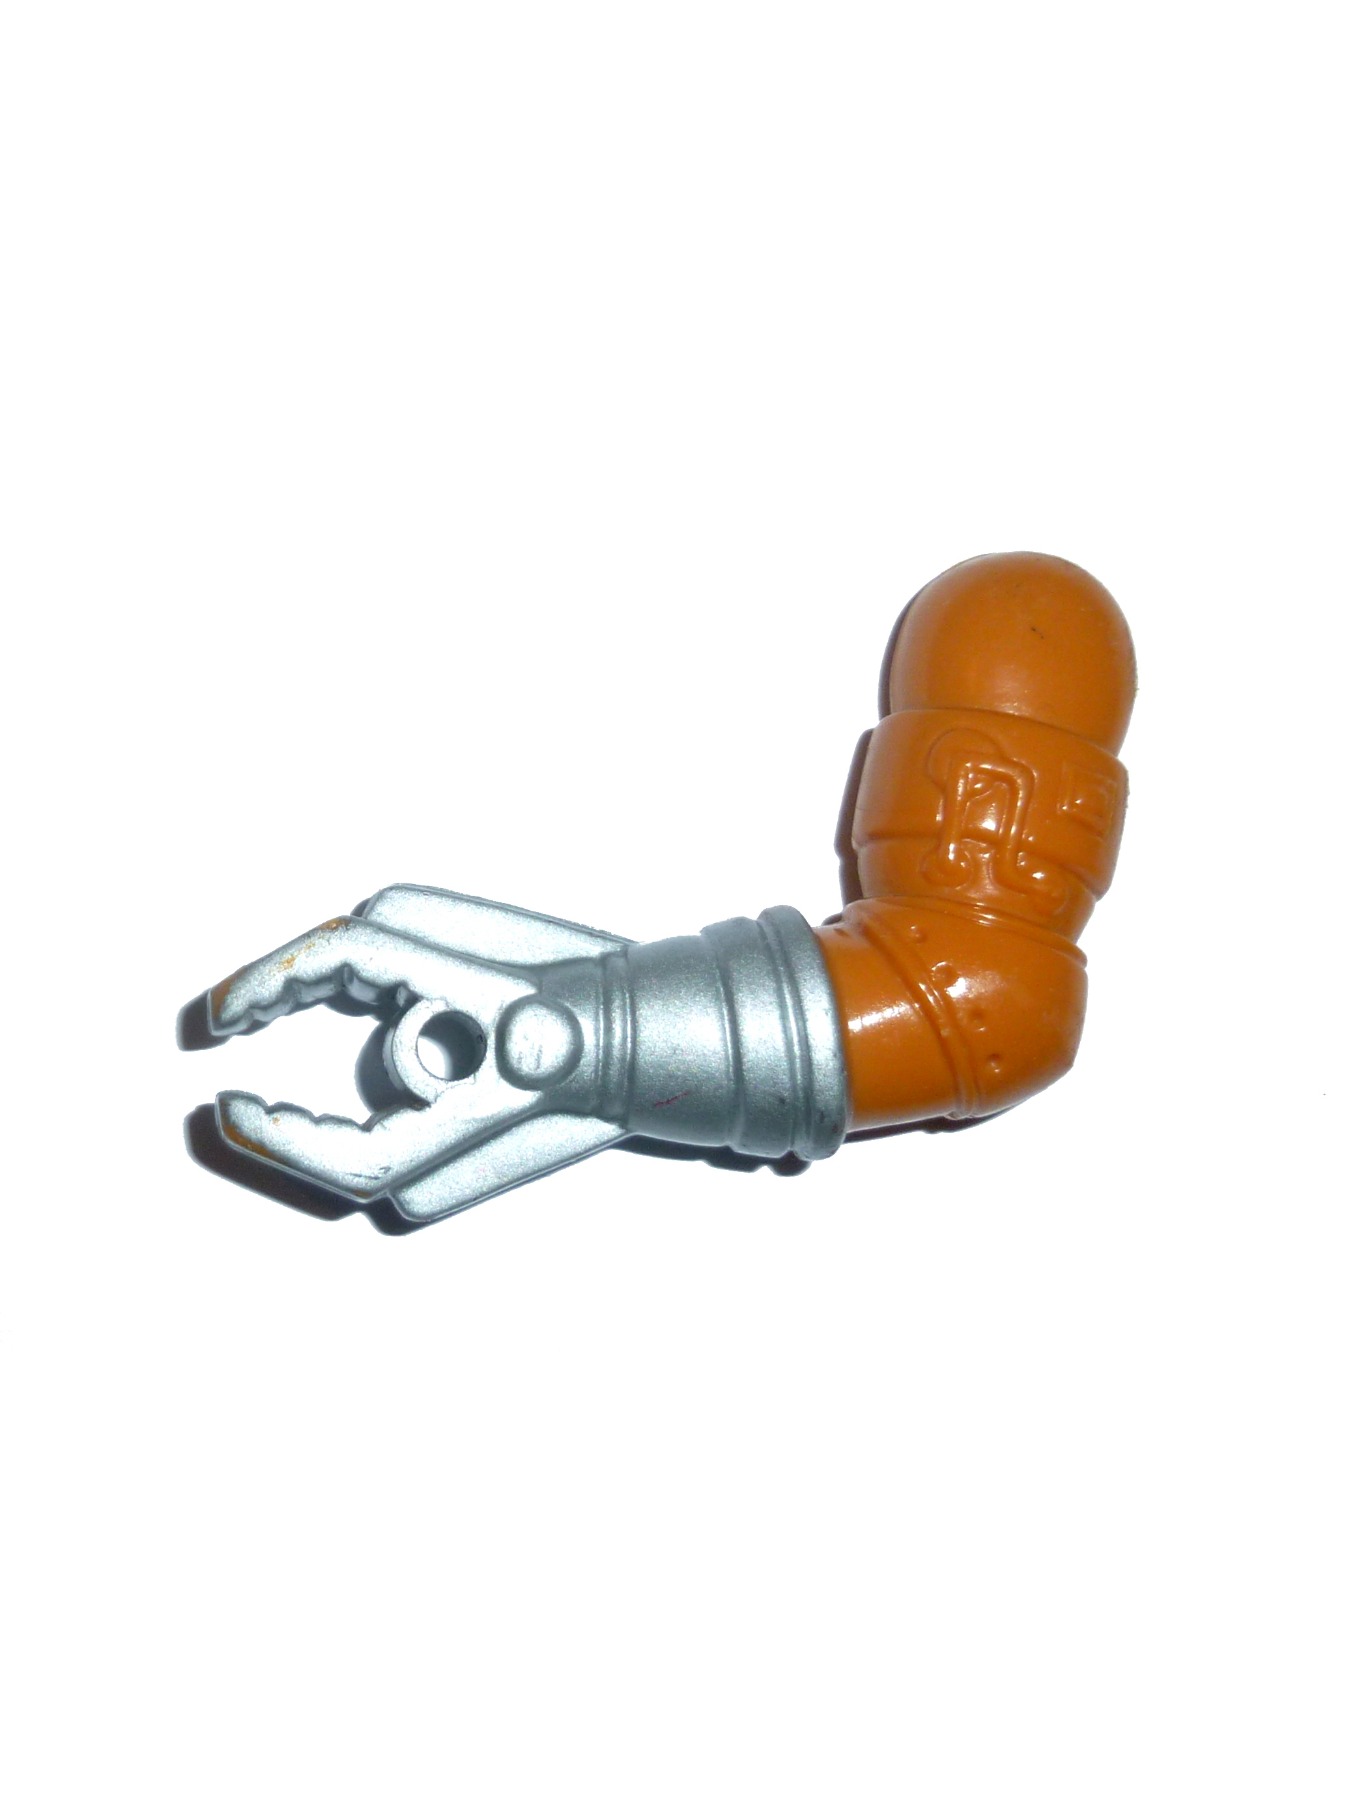 Multi-Bot - left arm with pincer hand - spare part